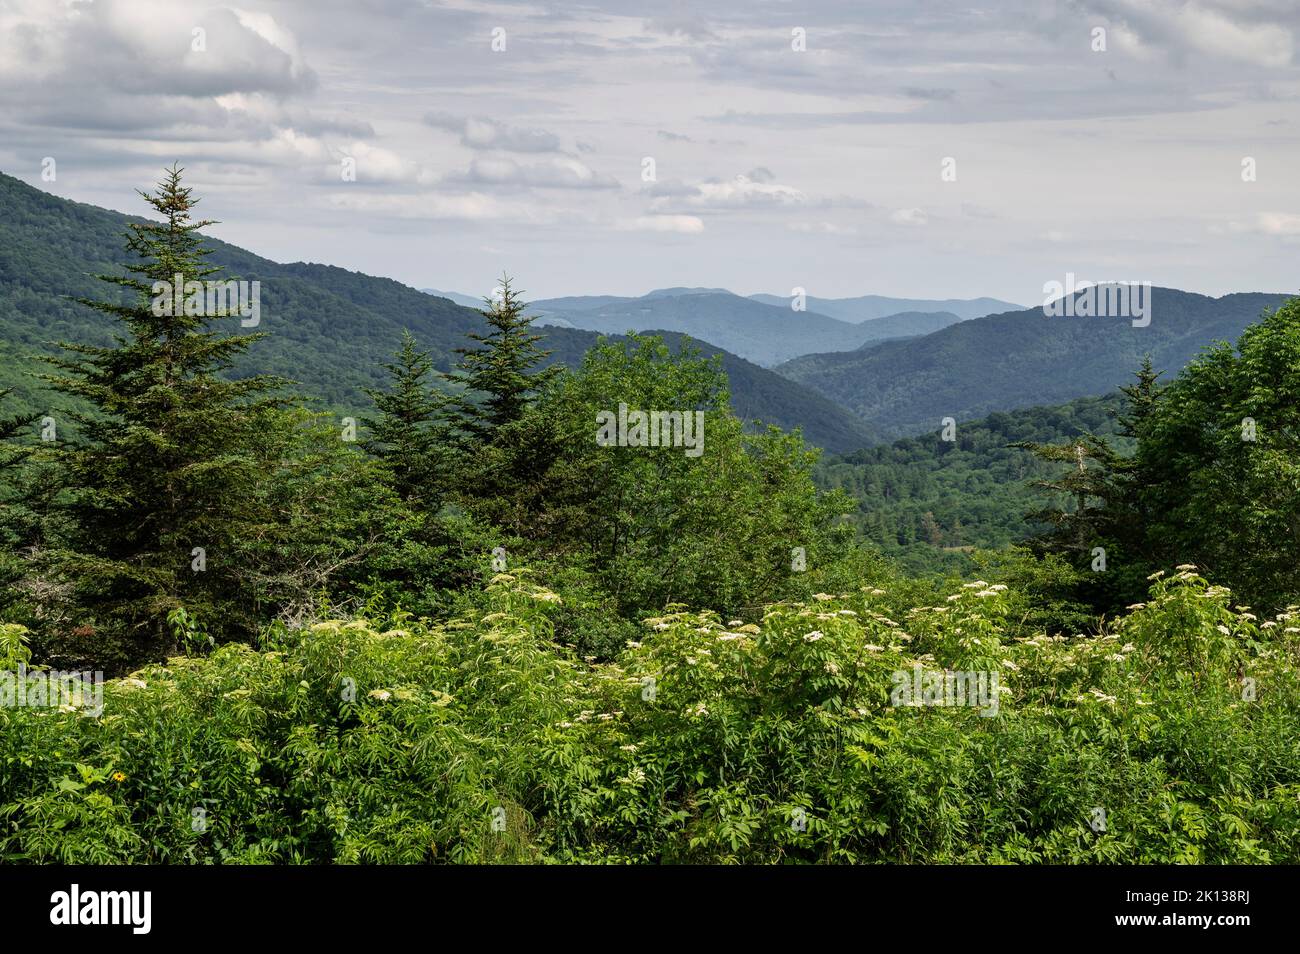 View of the Blue Ridge Mountains from the Appalachian Trail in summer, Avery County, North Carolina, United States of America, North America Stock Photo